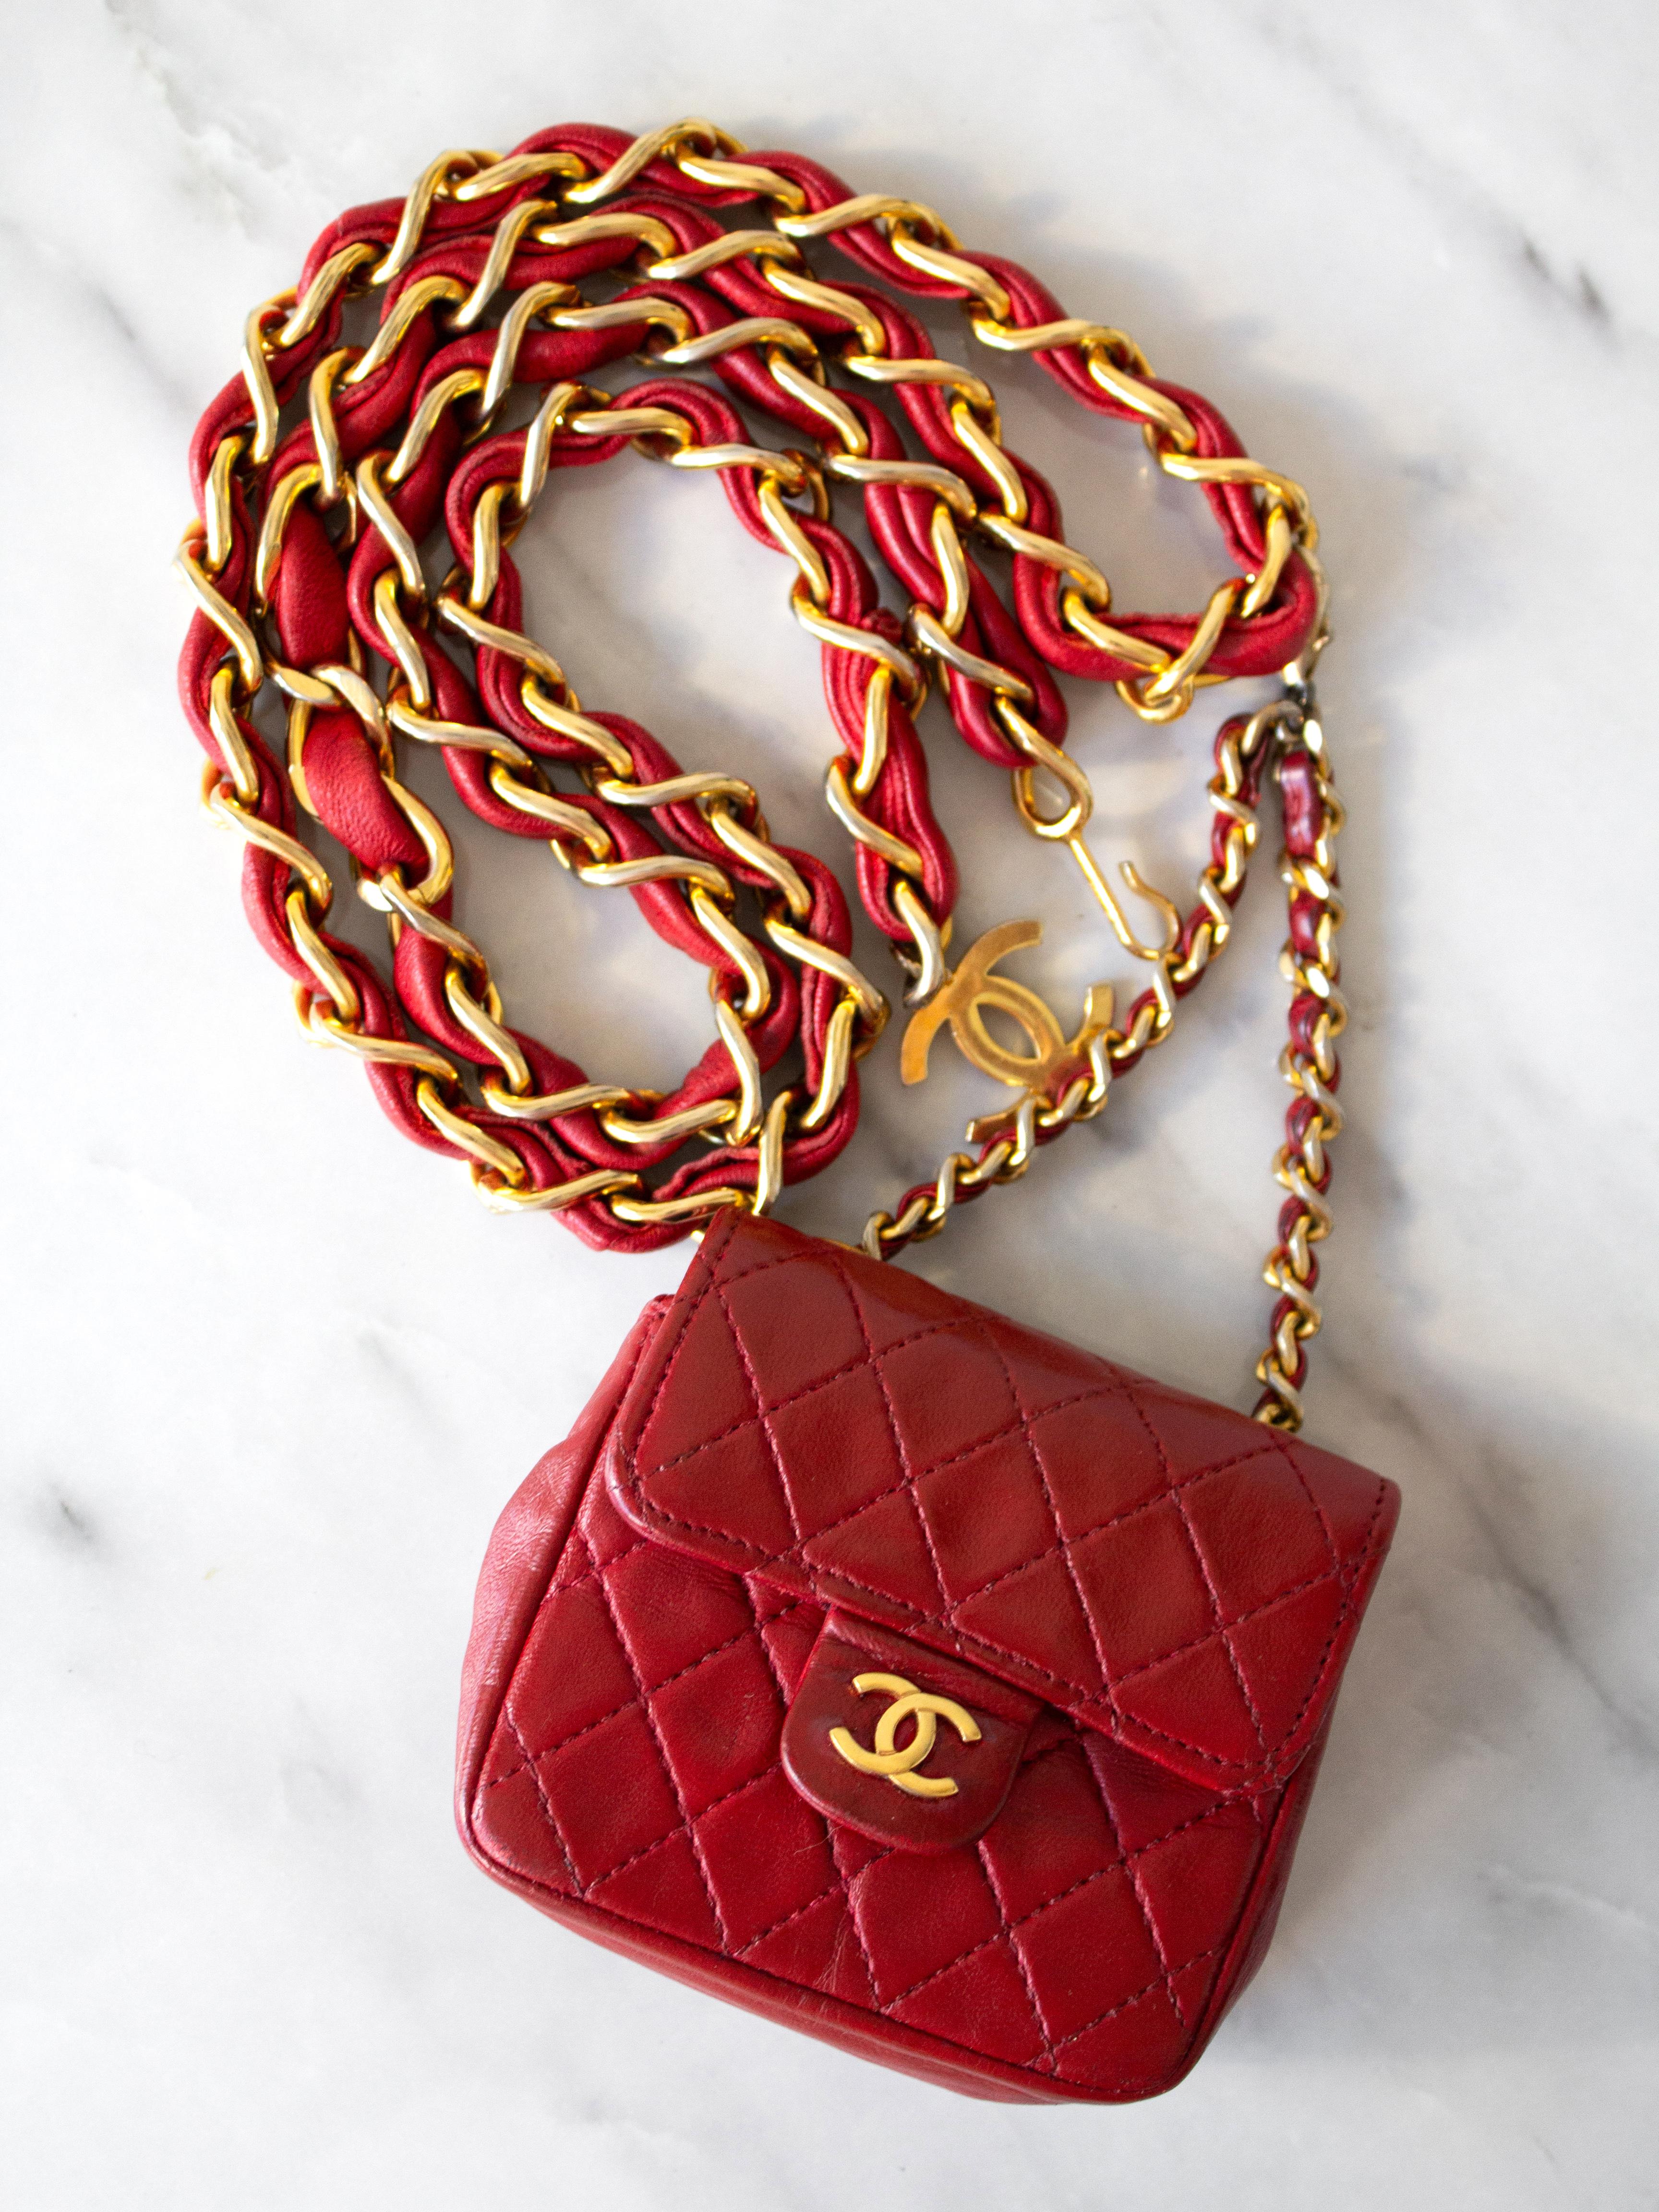 This vintage Chanel belt bag from the 1990s is a standout piece. The micro bag, opening with a CC push button, reveals a vibrant red leather interior, perfect for holding AirPods and keys. Its adjustable gold-plated chain link waist belt is